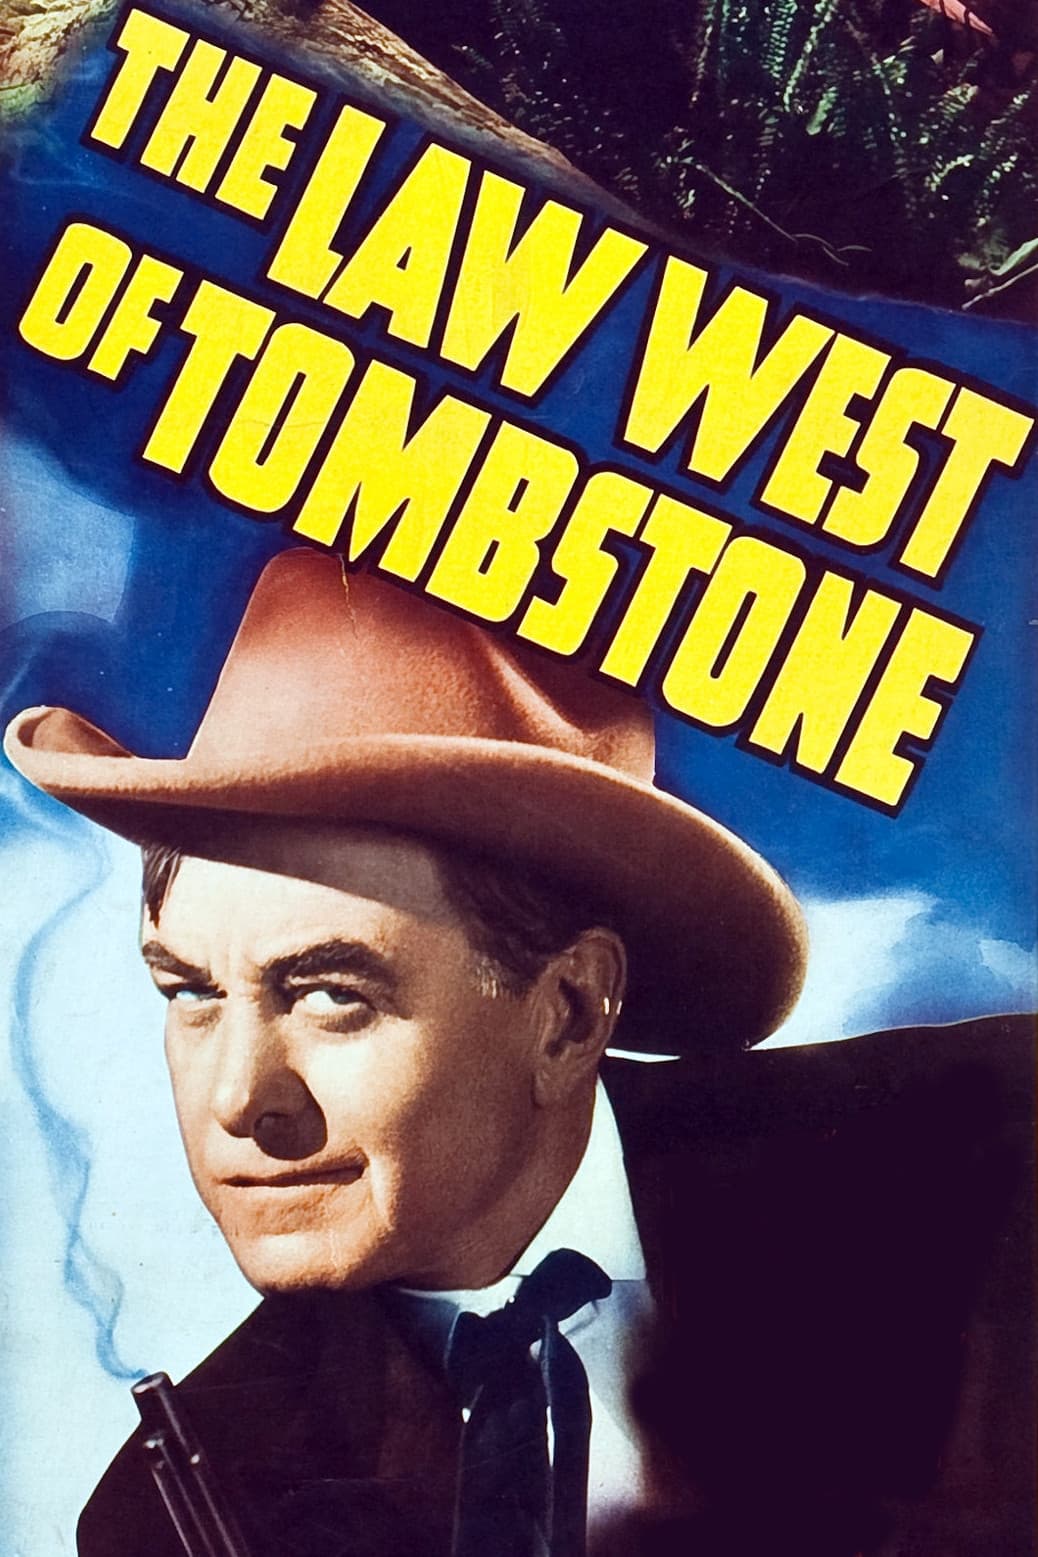 The Law West of Tombstone